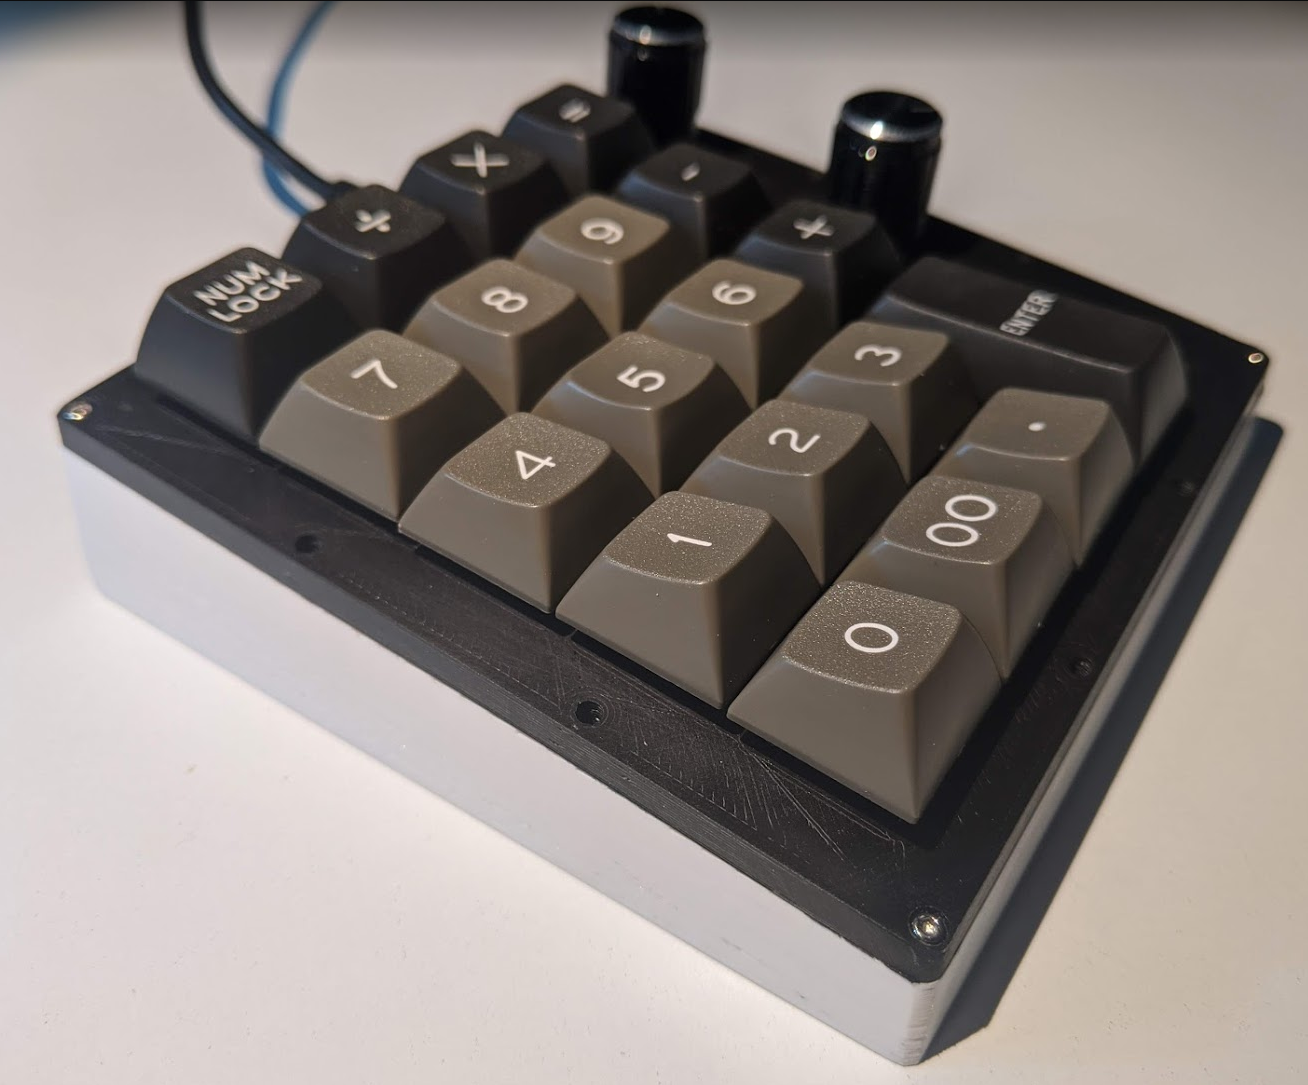 Numpad with 3D printed case